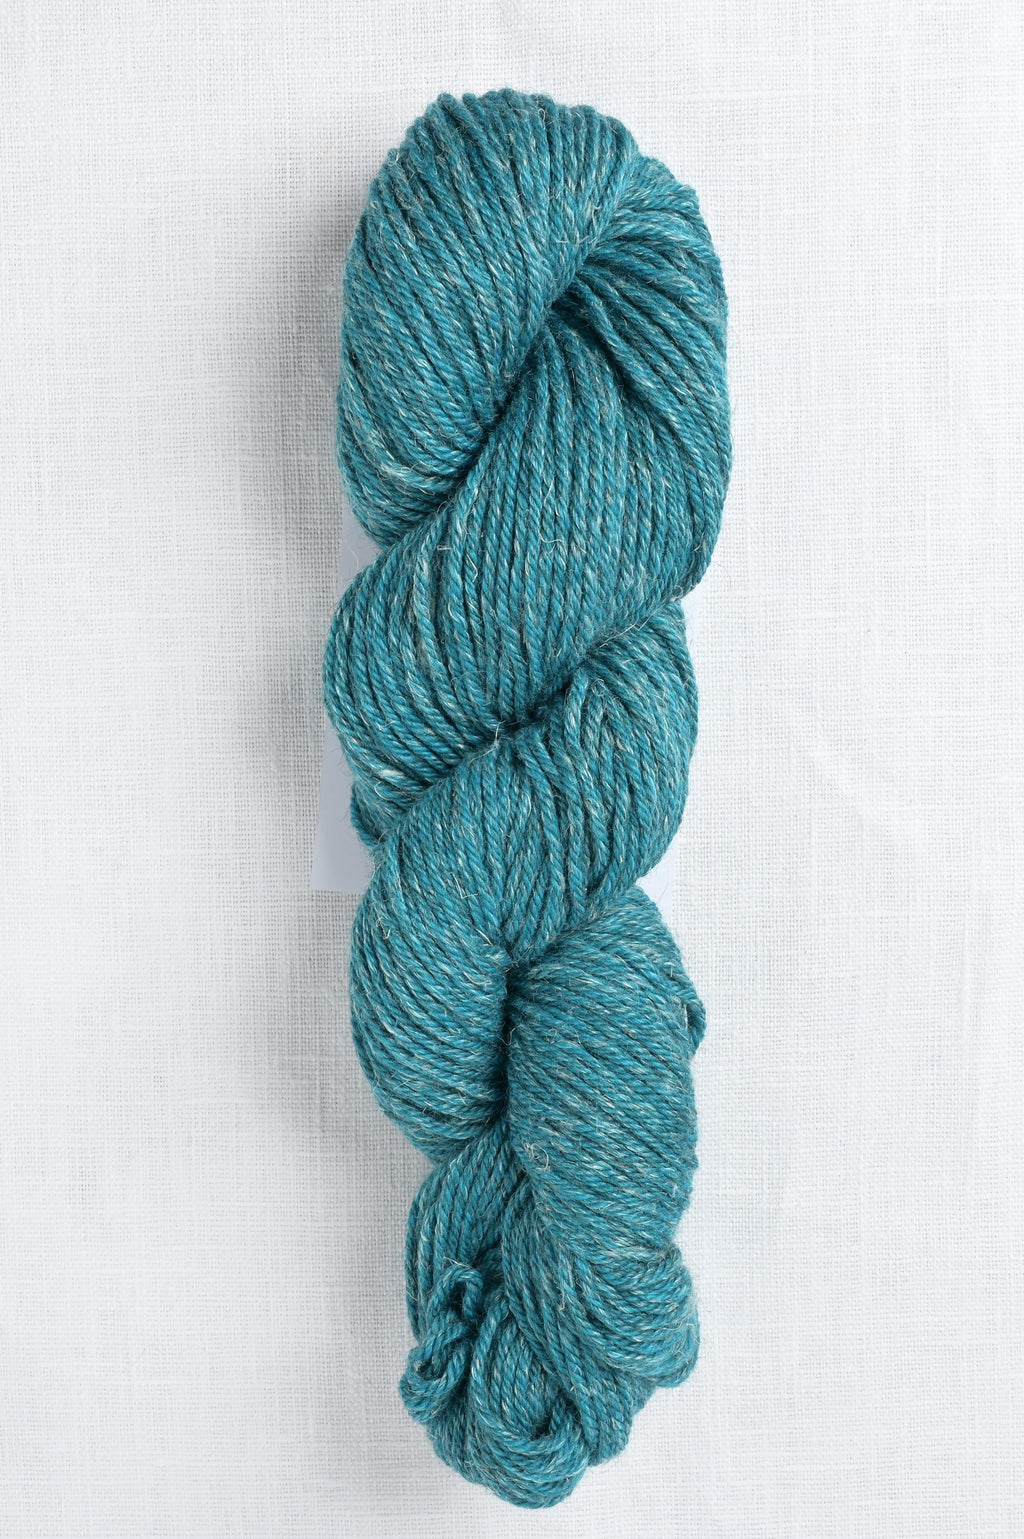 fyberspates stolen stitches nua worsted 9903 hatter's teal party